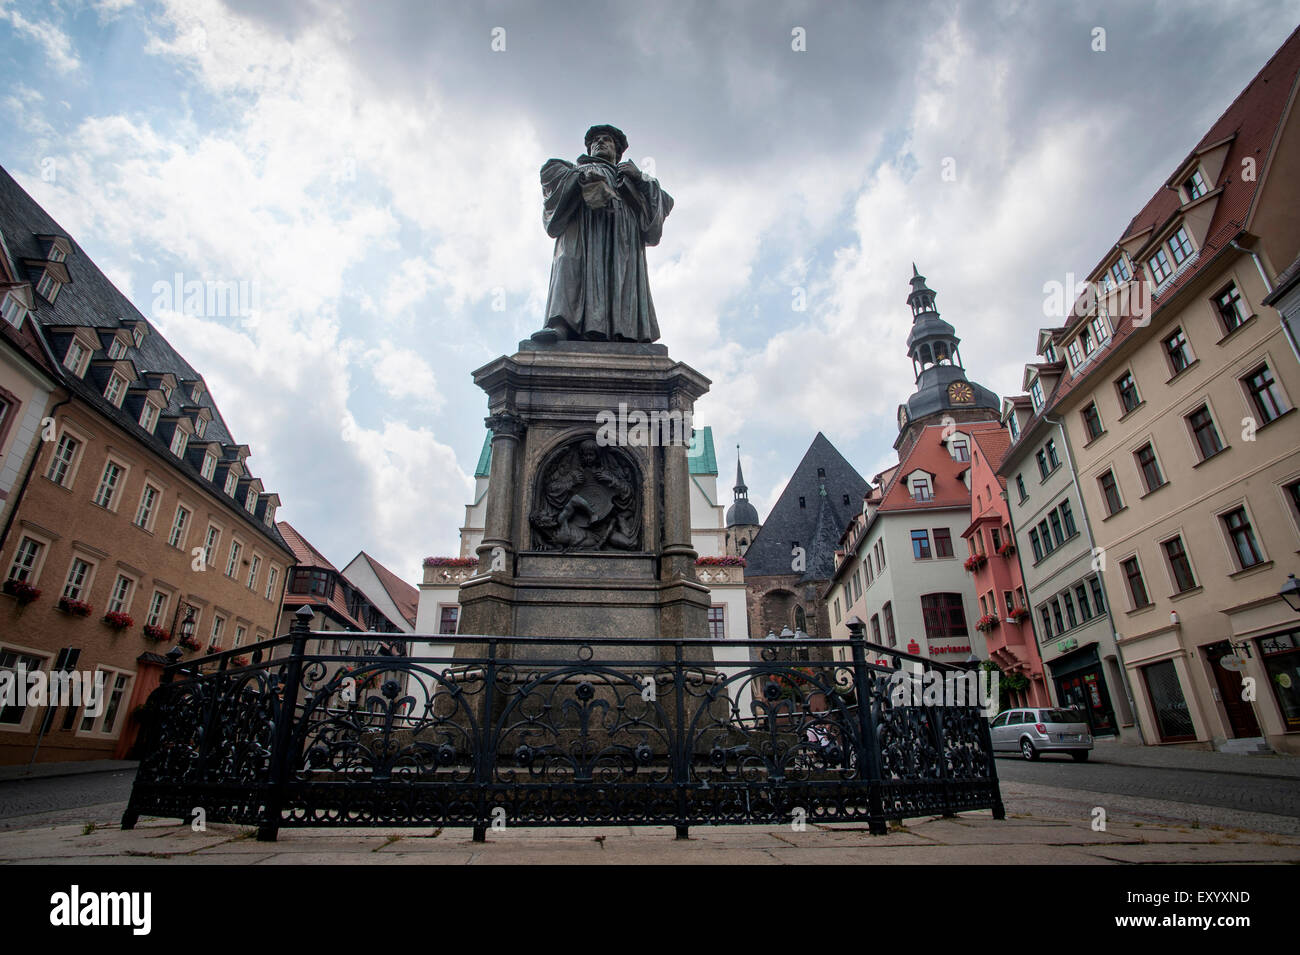 The marketplace in Eisleben where a statue of Martin Luther is placed.Eisleben was Martin Luther's birthplace and where he died Stock Photo